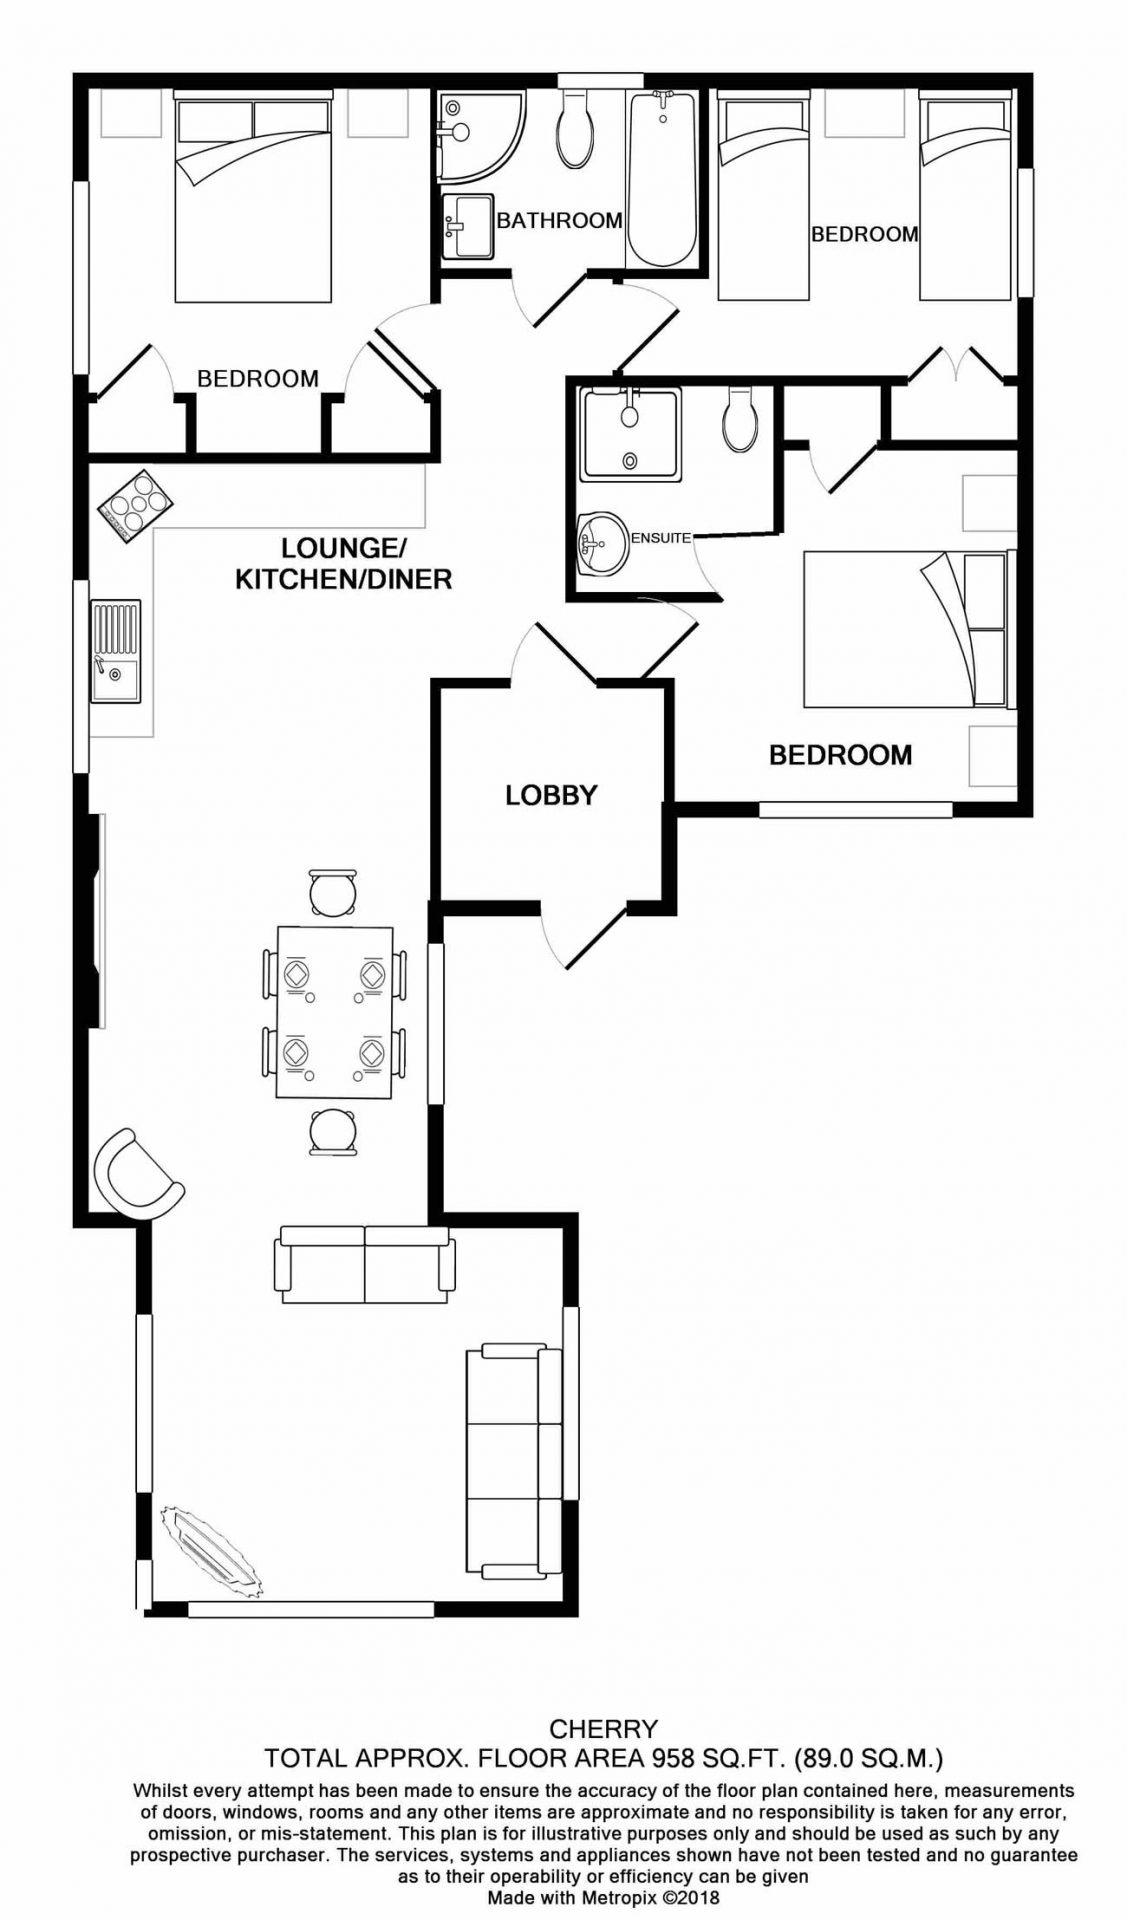 Cherry Floor Plan Luxury Self Catering Holiday Cottages